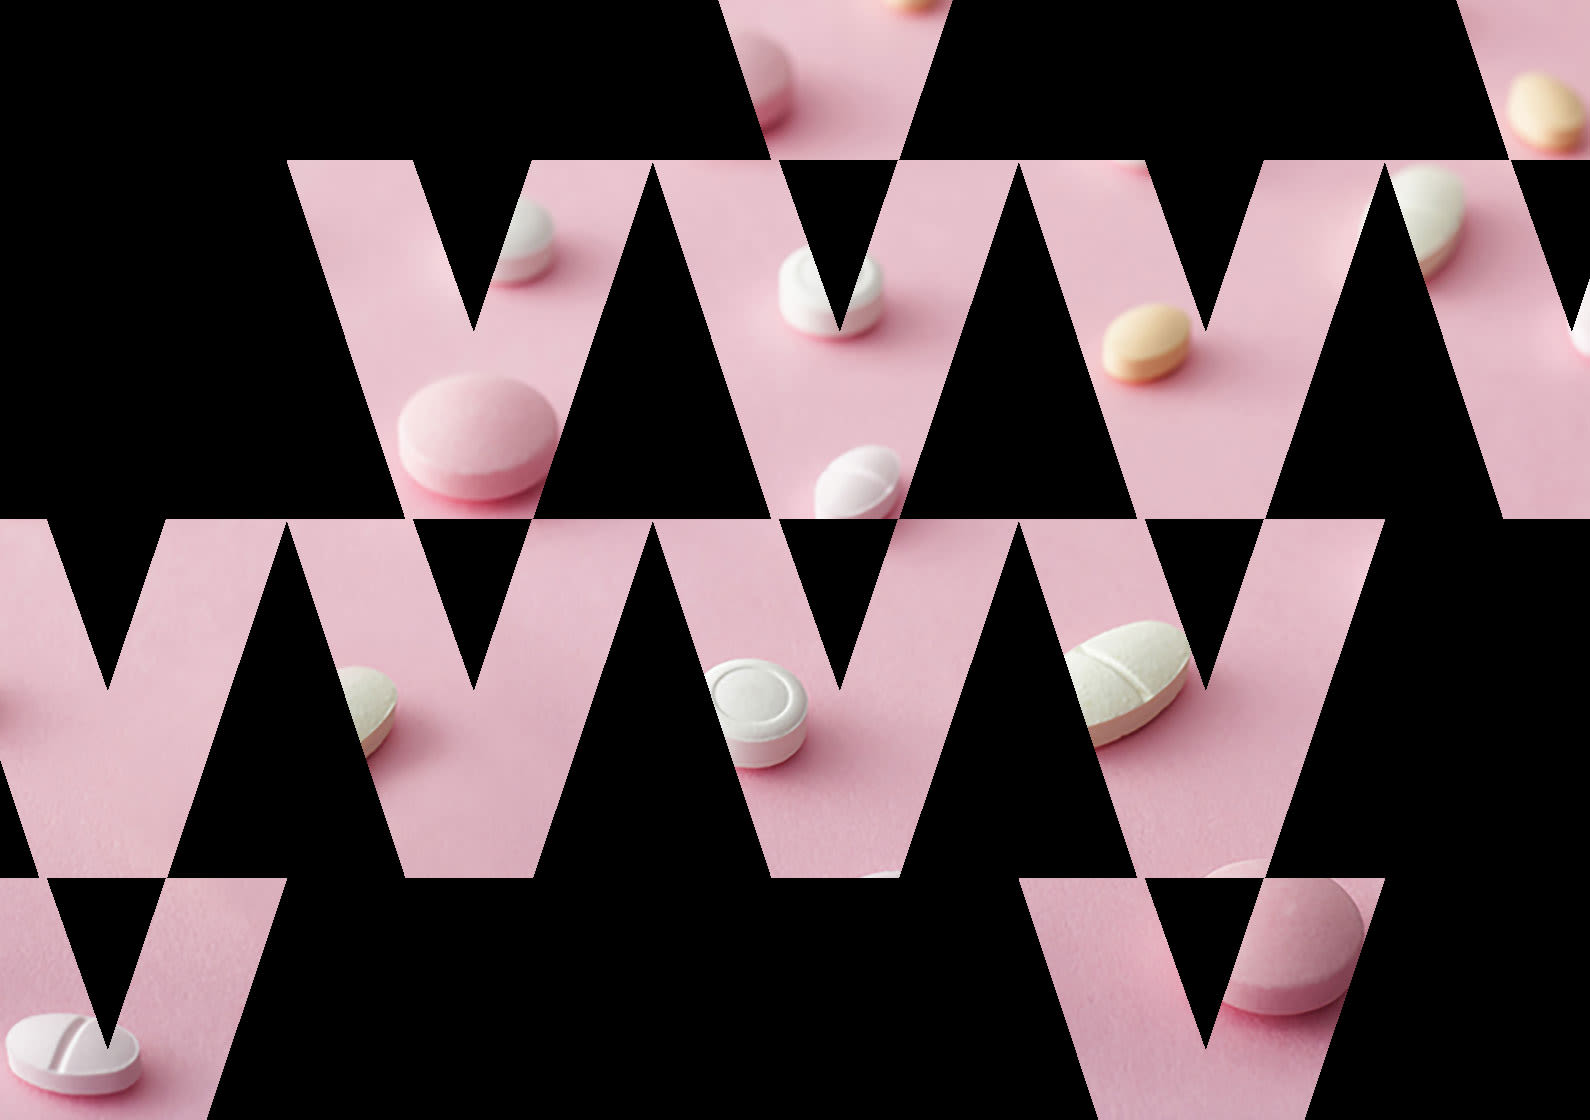 Birth control pills on a pink background with Veracity V pattern overlaid